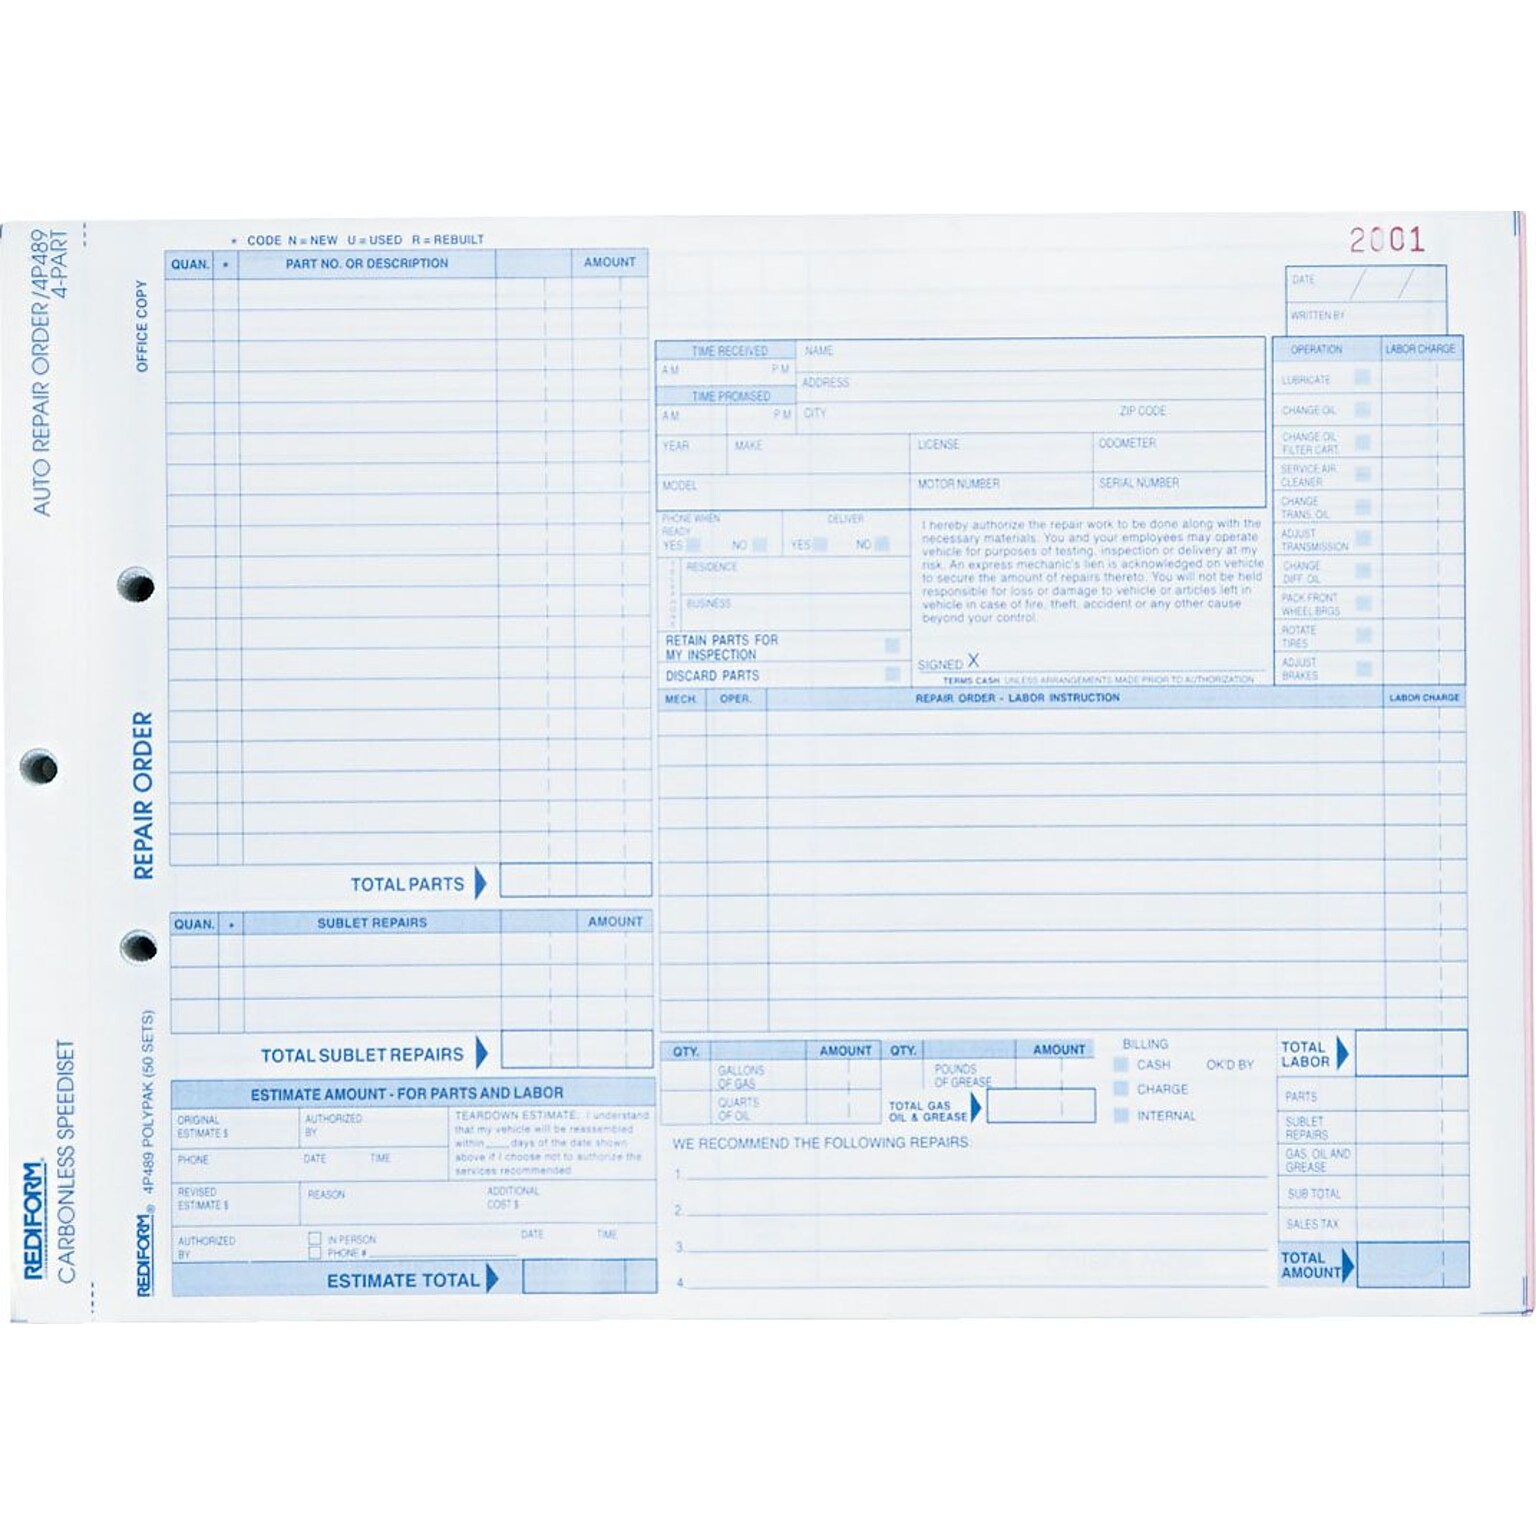 Rediform 4-Part Carbonless Purchase Requisitions, 8.5L x 11W, 50 Sets/Book (RED4P489)